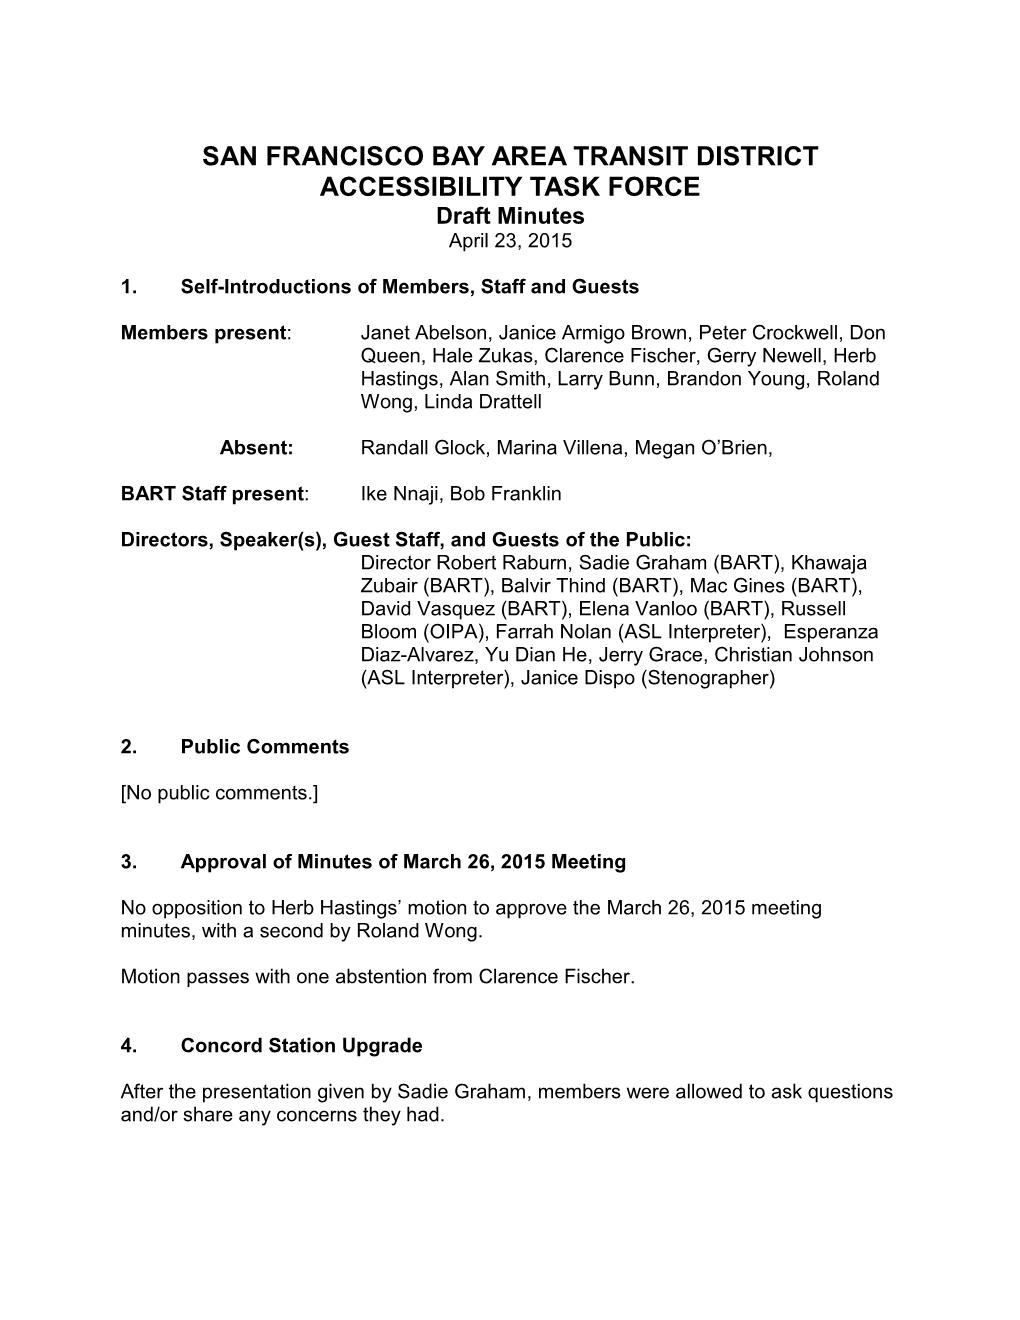 SAN FRANCISCO BAY AREA TRANSIT DISTRICT ACCESSIBILITY TASK FORCE Draft Minutes April 23, 2015